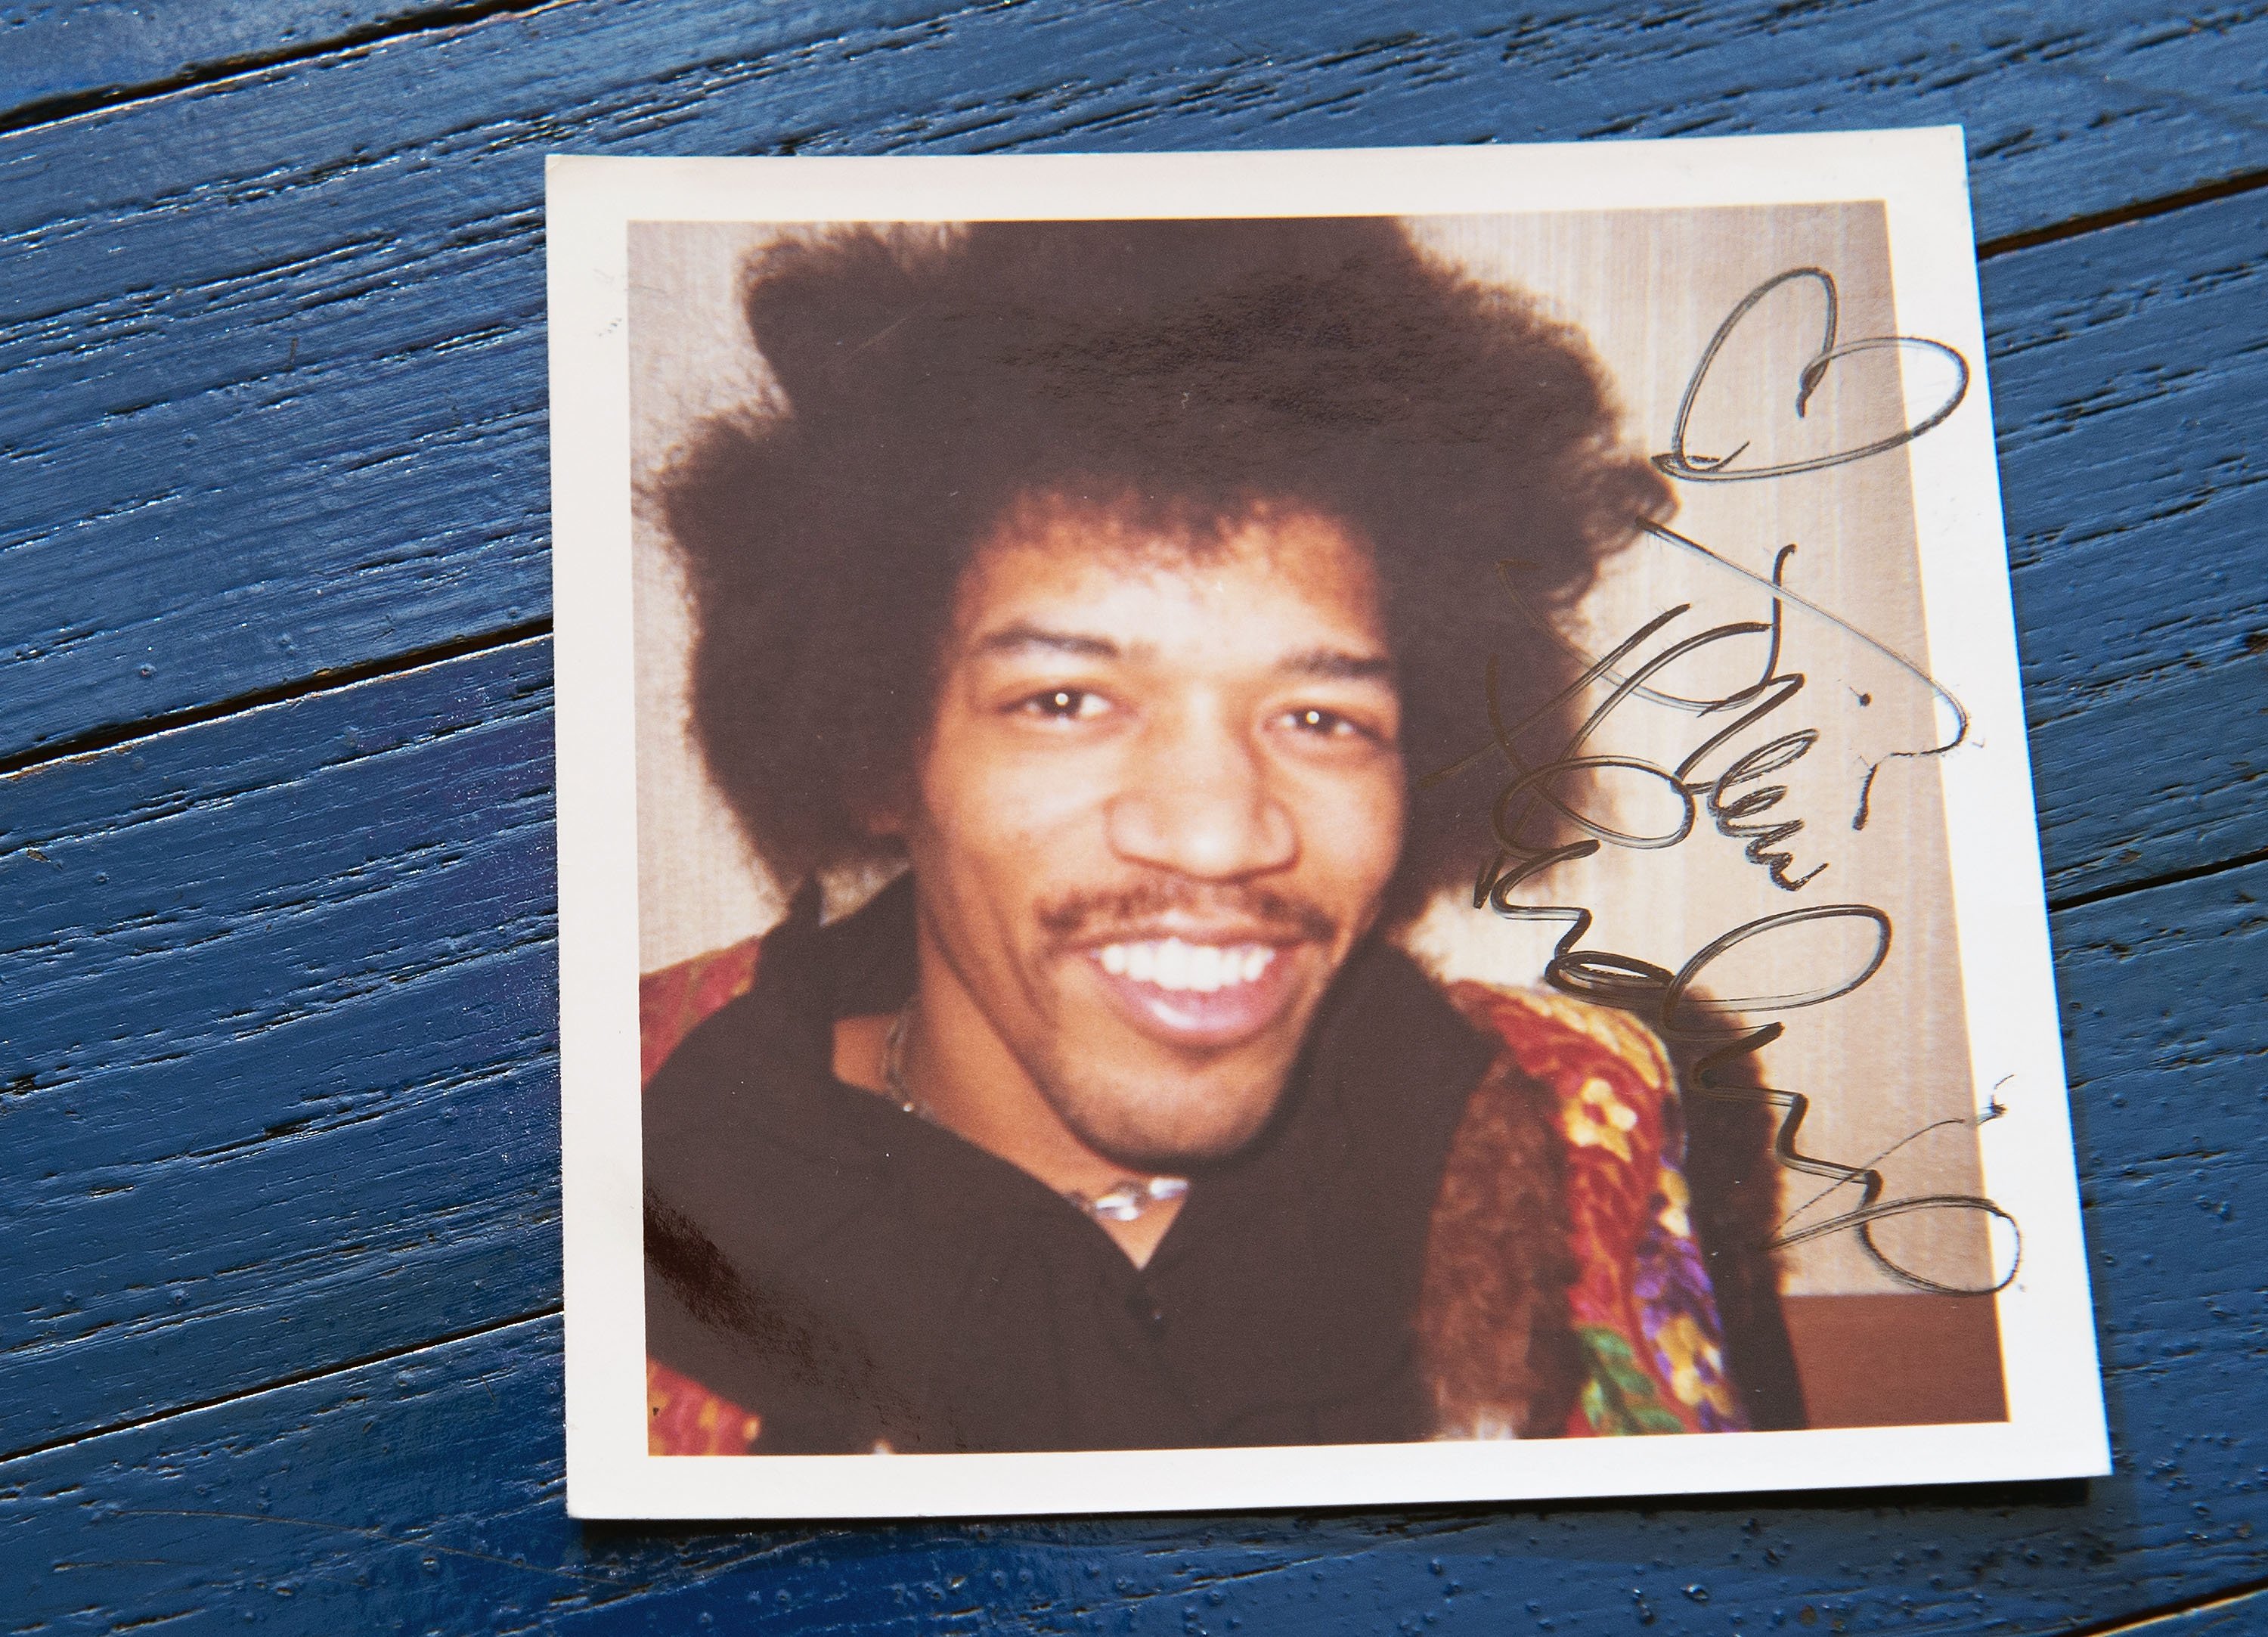 A signed picture of Jimi Hendrix smiling